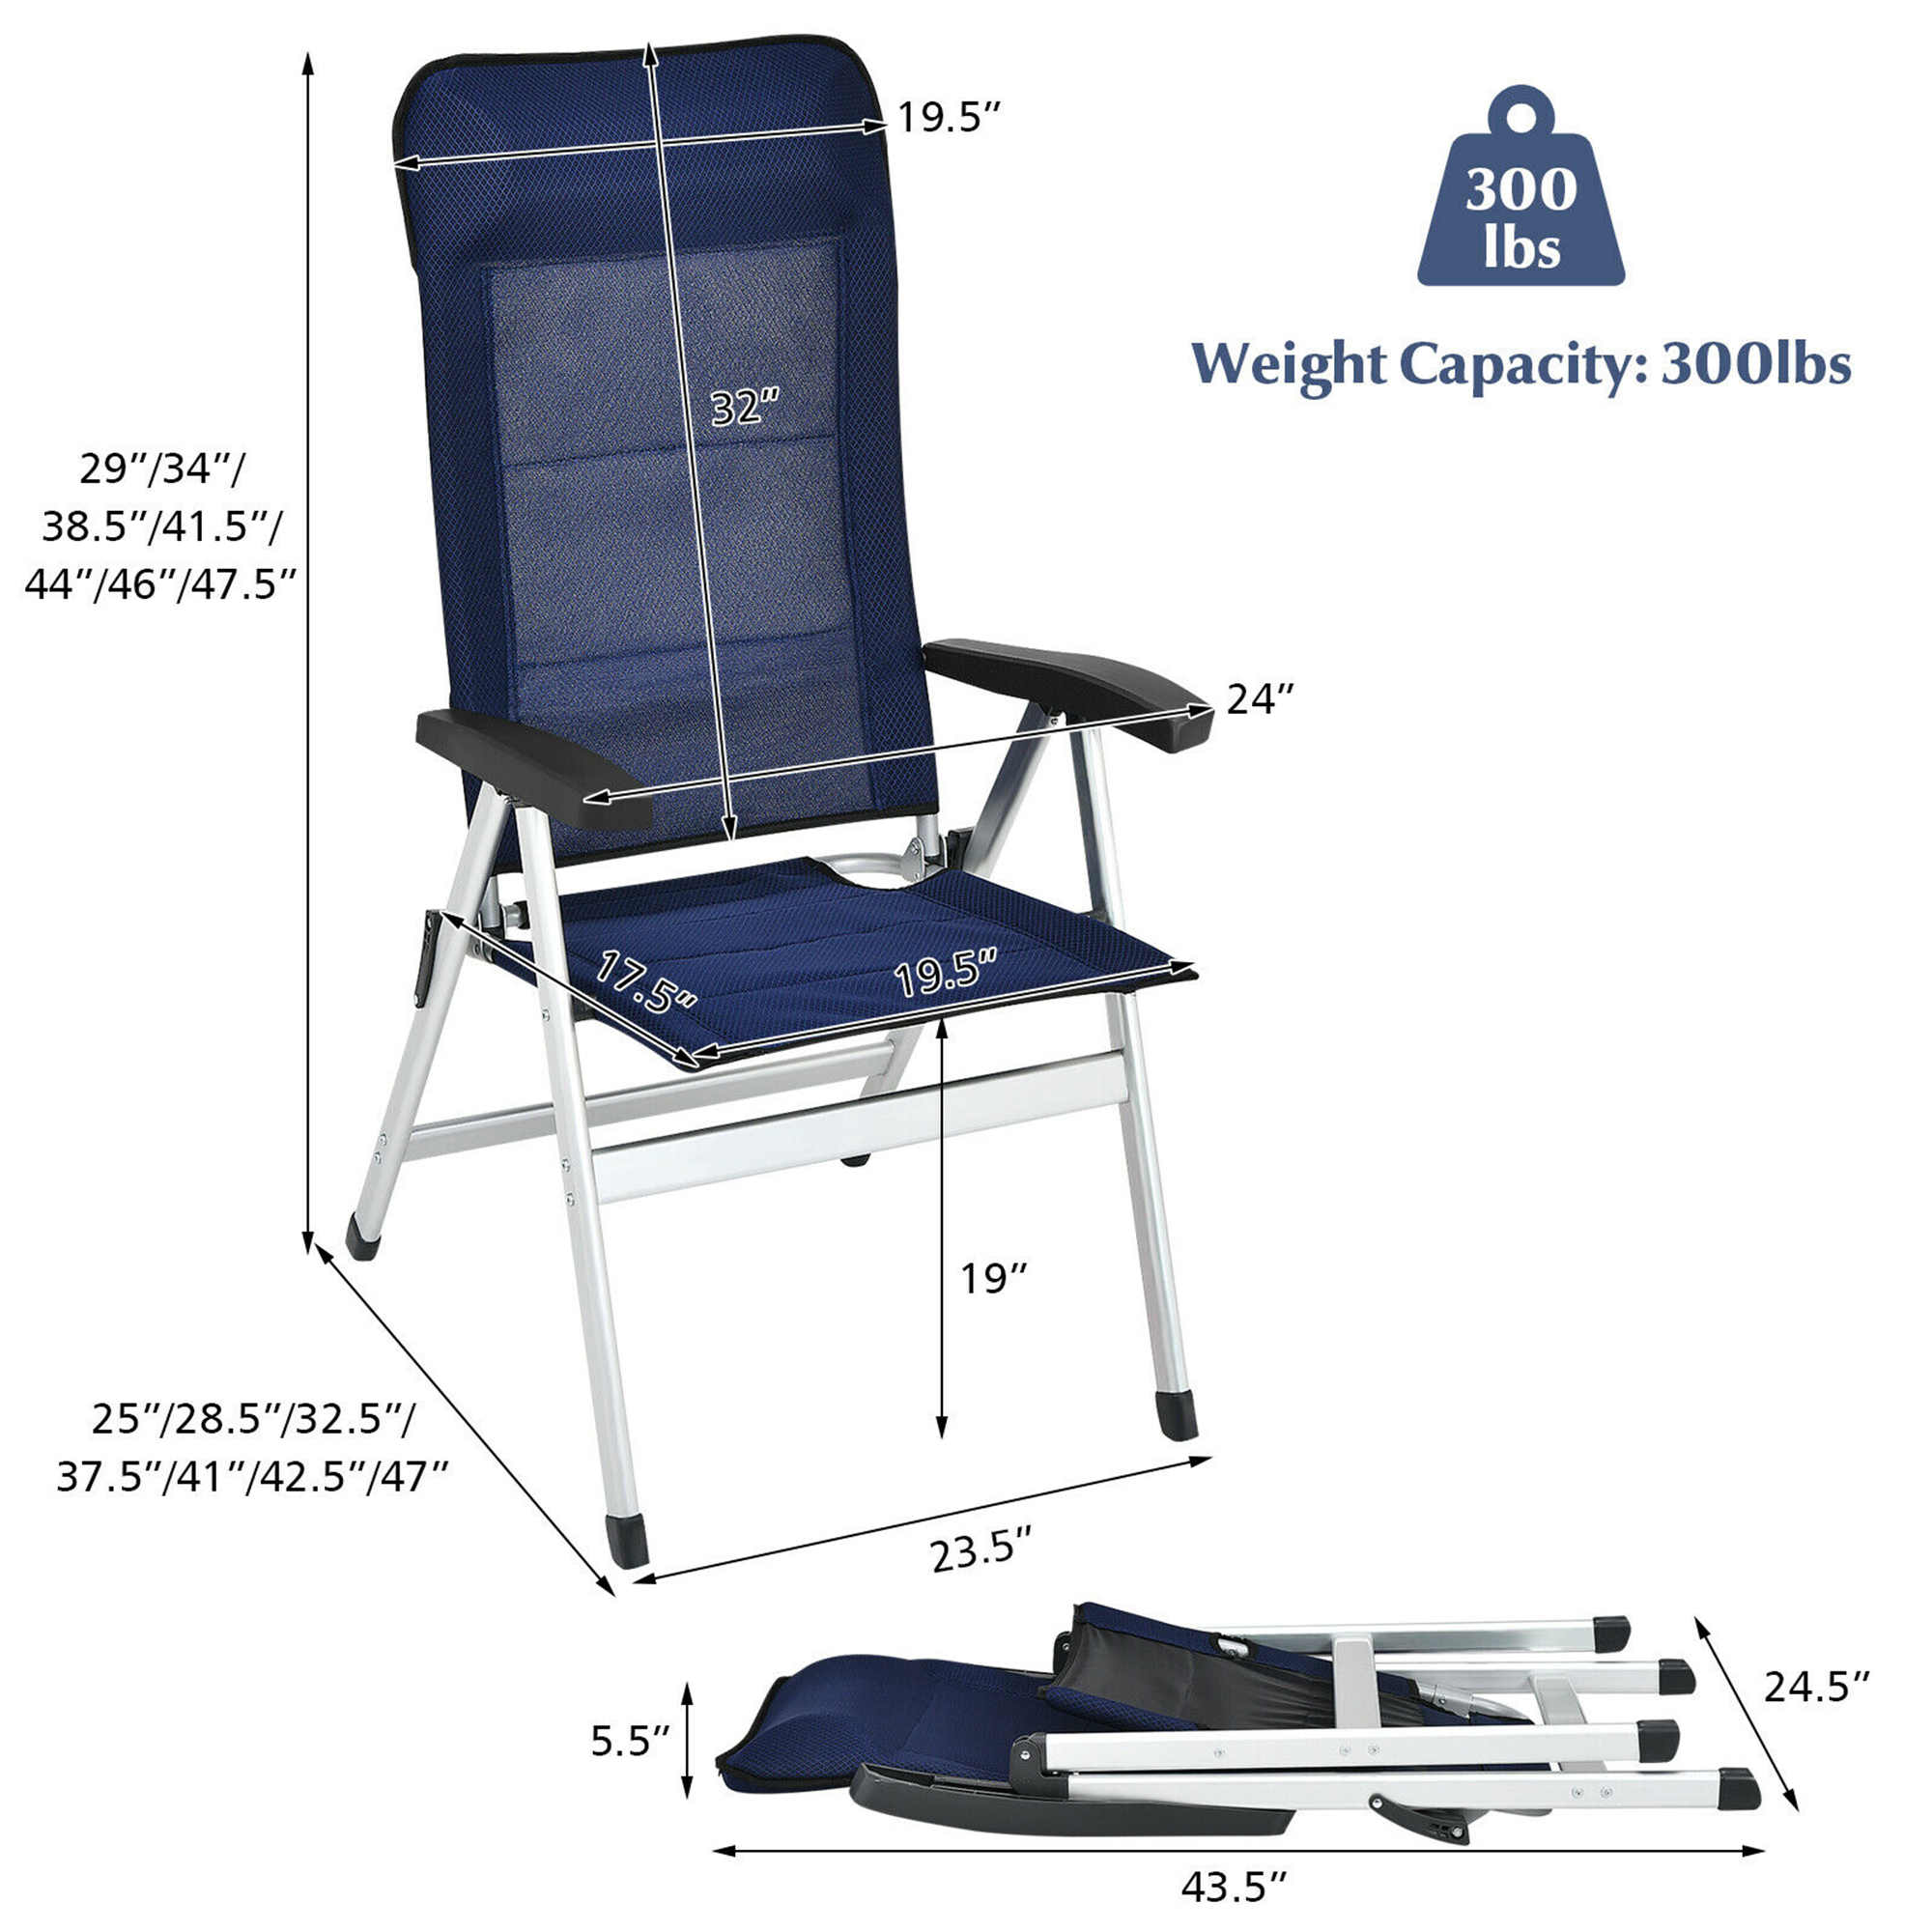 Costway 2PCS Patio Dining Chair Aluminum Camping Adjust Portable Headrest Navy - image 2 of 10